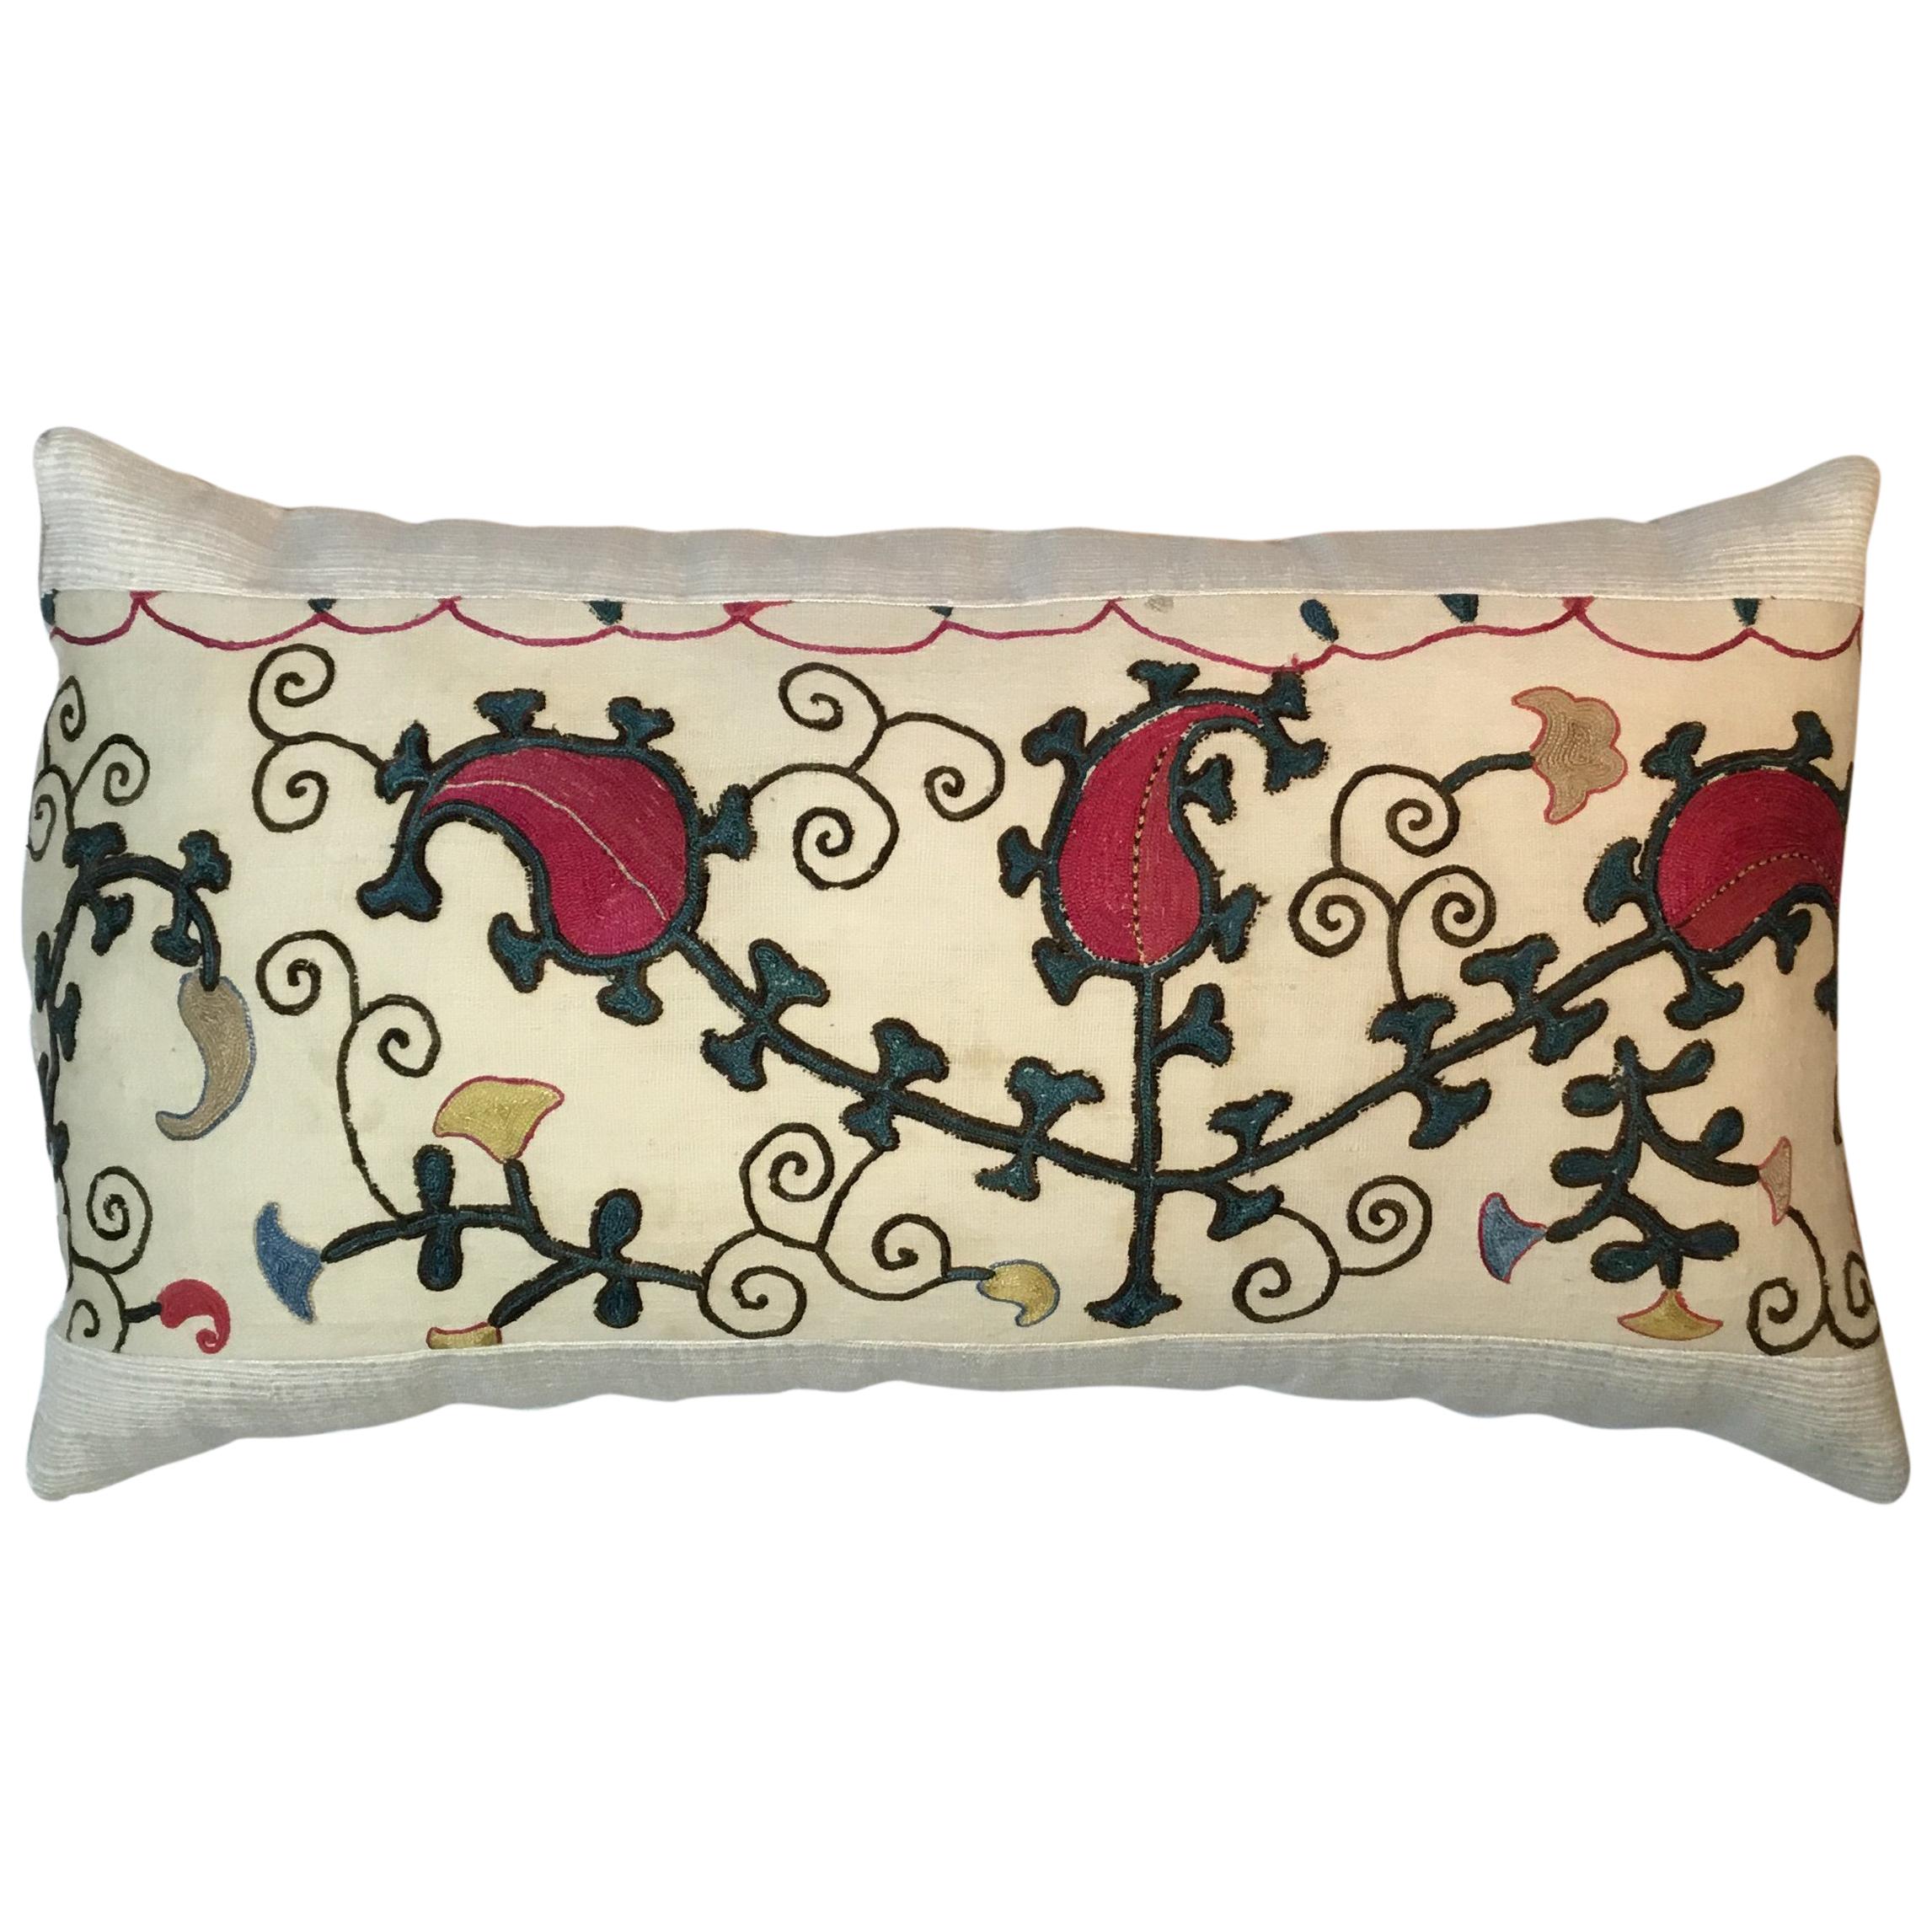 Antique Hand Embroidery Suzani Pillow